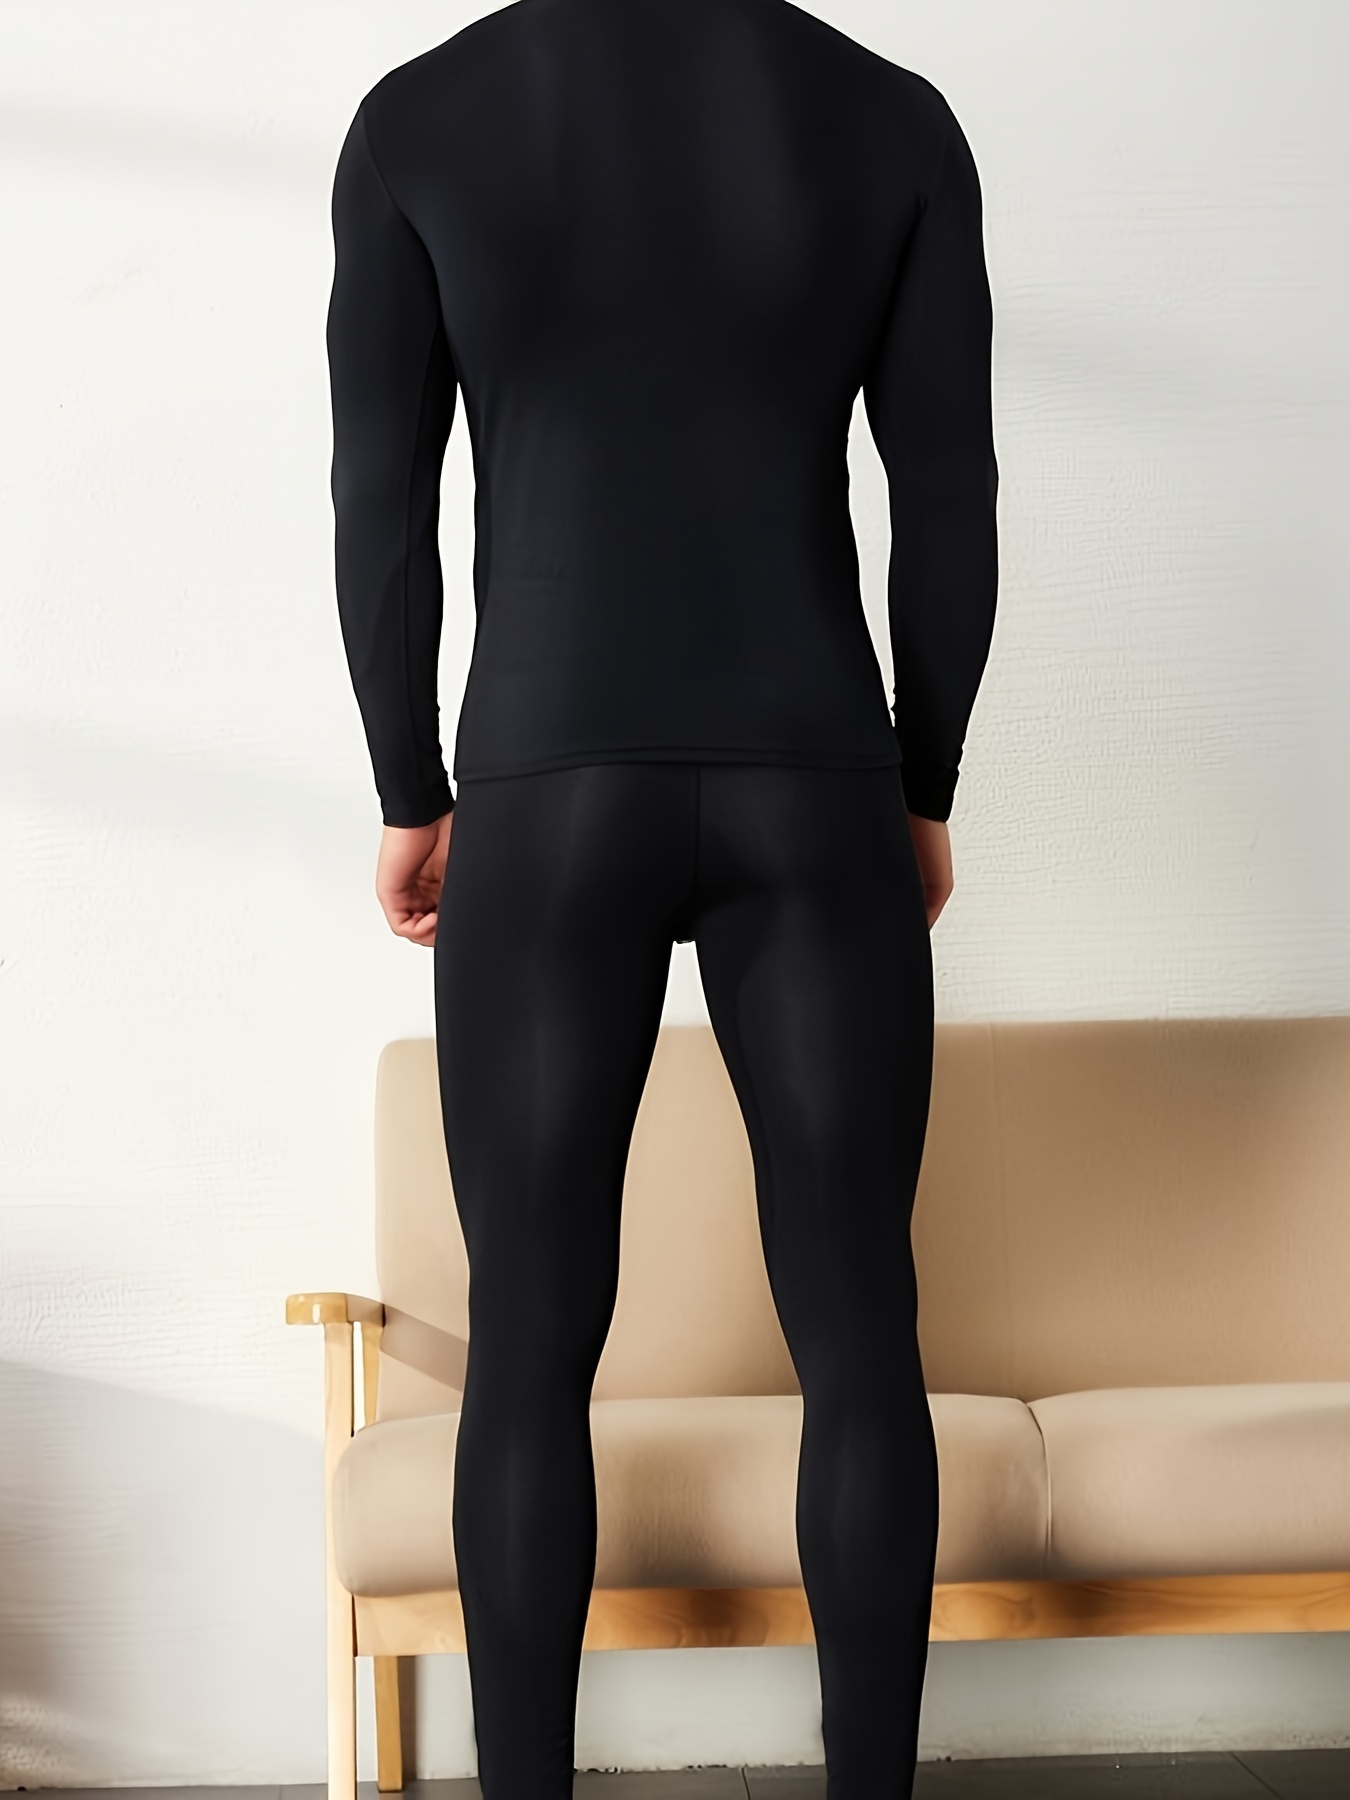 Thermal Underwear Elastic Autumn Winter Sleeve Home Office School Inner  Wear Slim Warm Tops Bottom Clothes Pants Suit for Male Man Black